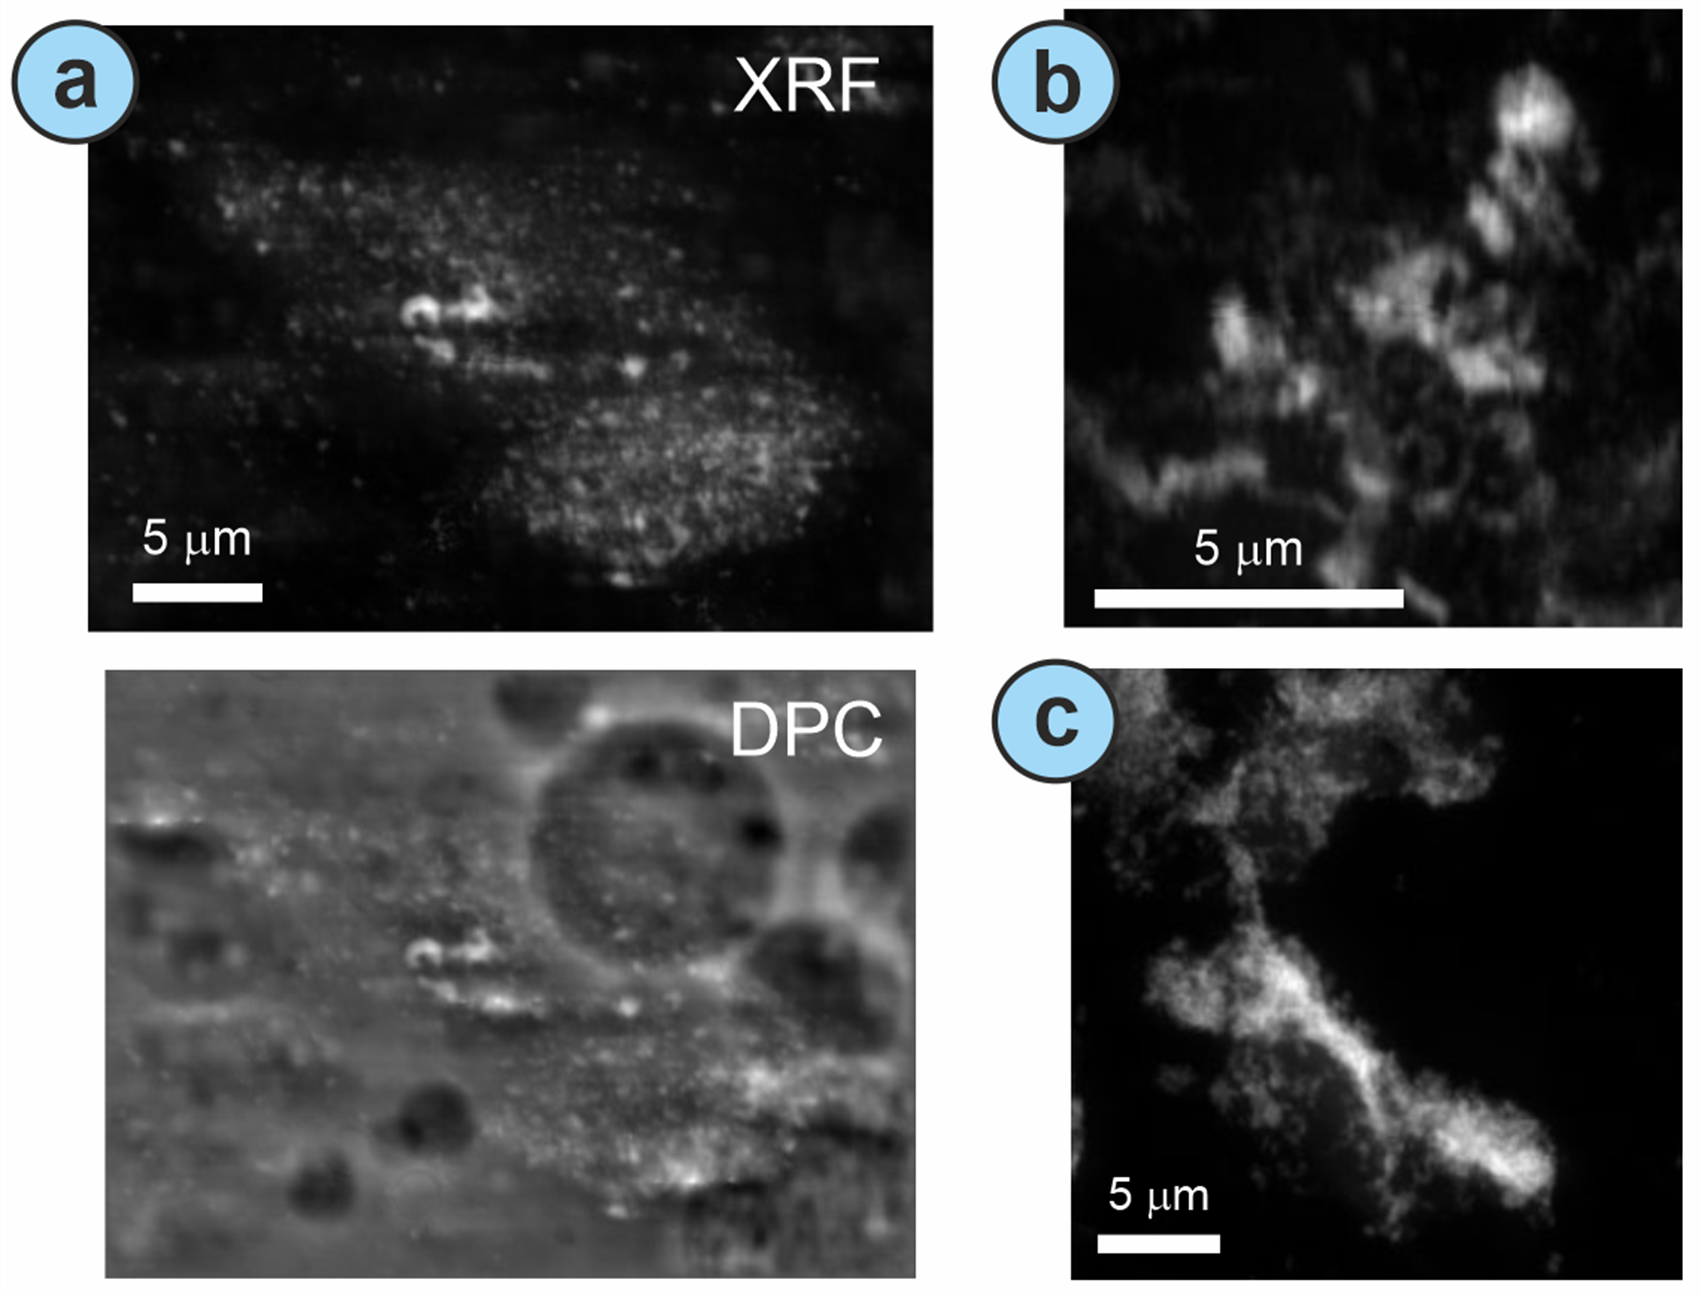 Figure 2 - X-ray fluorescence (XRF) image and XRF images